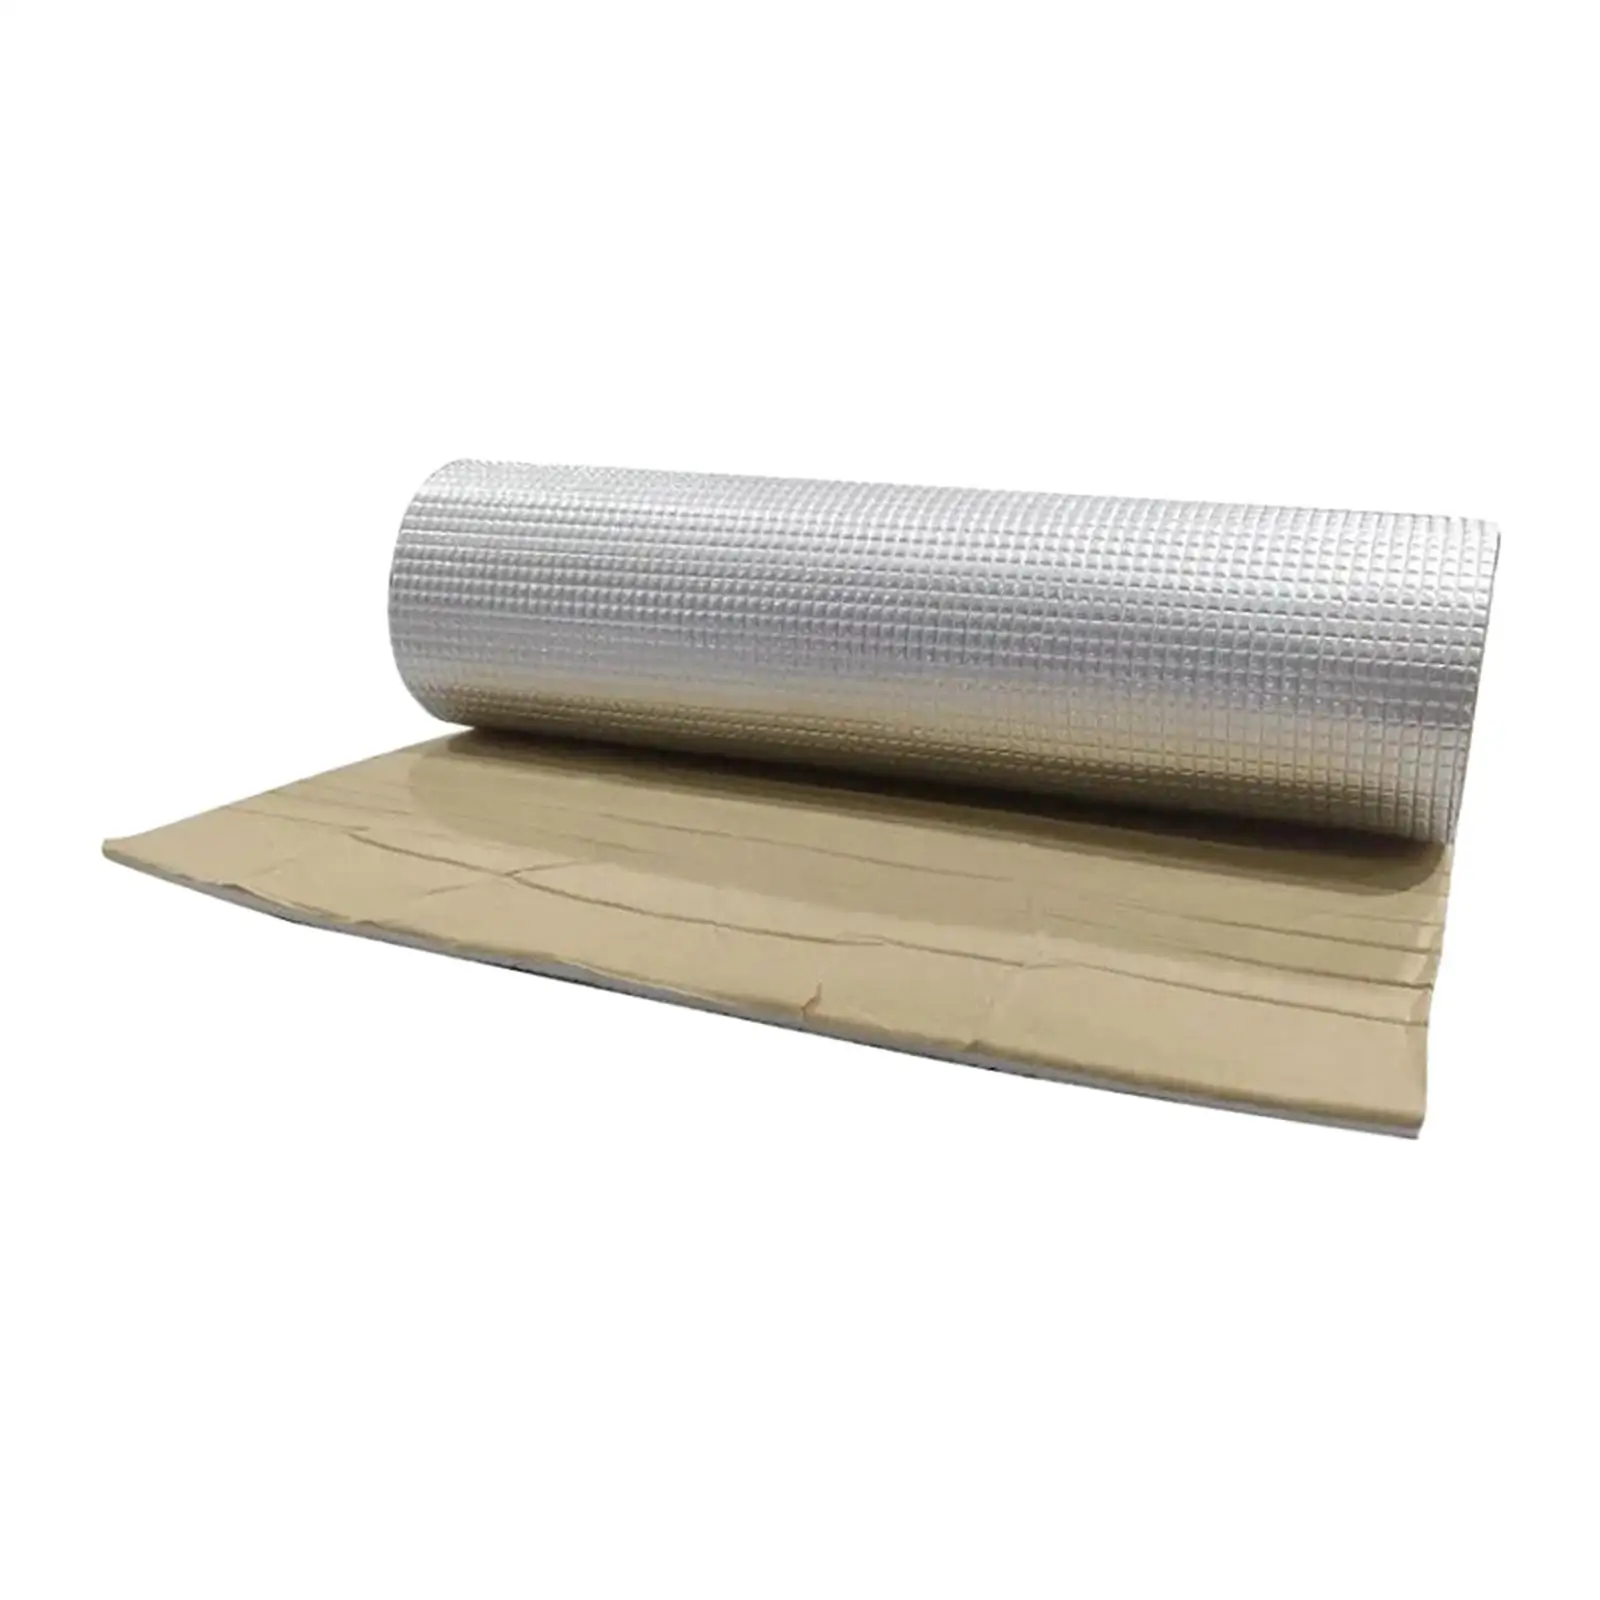 Audio Noise Insulation and Dampening Thermal Insulation Properties Car Noise Sound Deadener Sound Deadener Insulation Mat